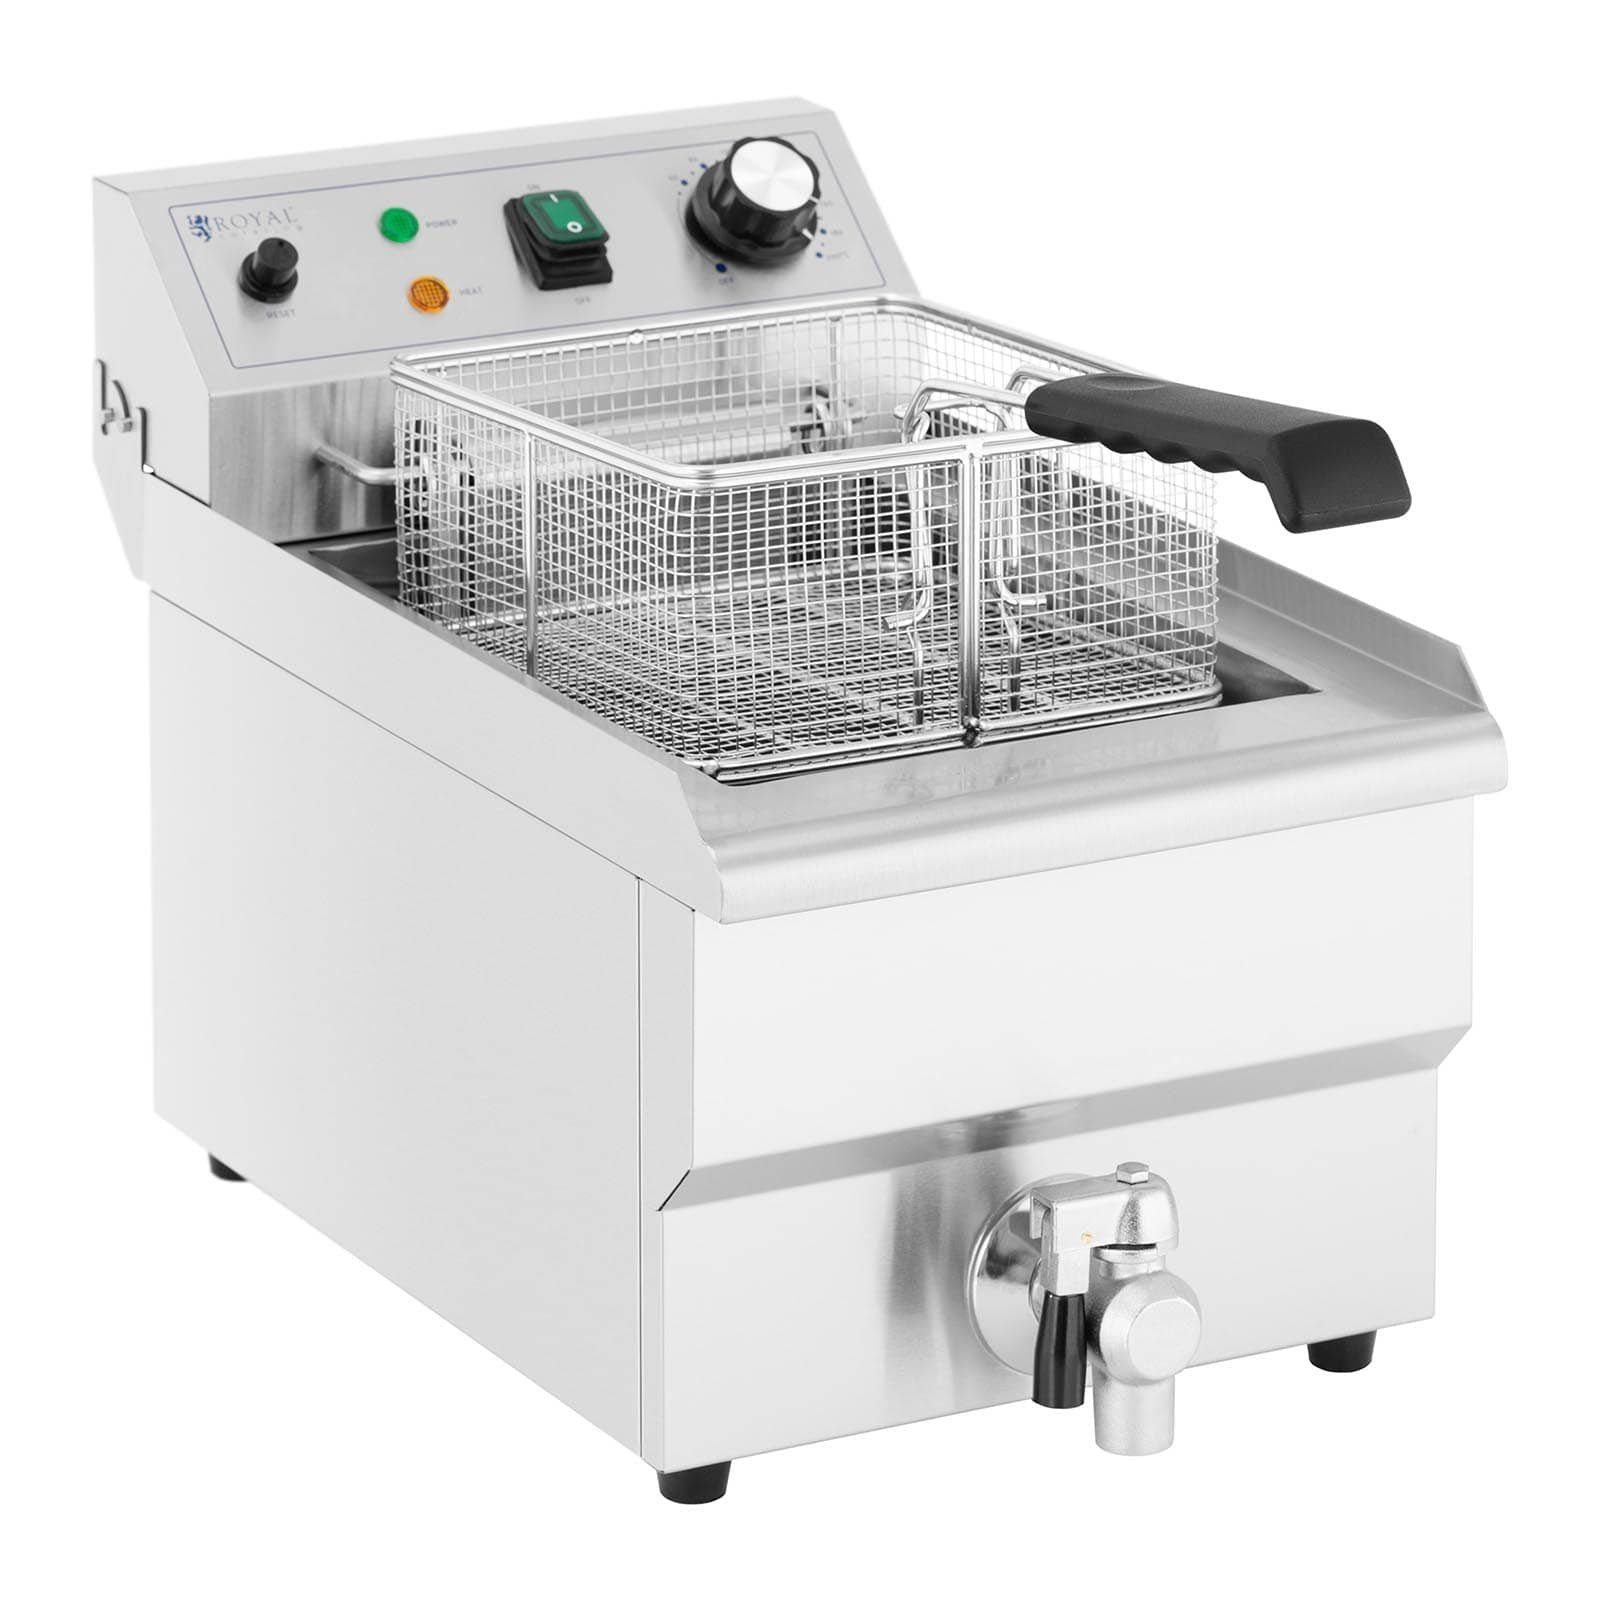 3.000 9 W Fritteuse Royal Catering Fritteuse Elektro-Fritteuse Kaltzonen L Fritteuse W, 3000 Gastro